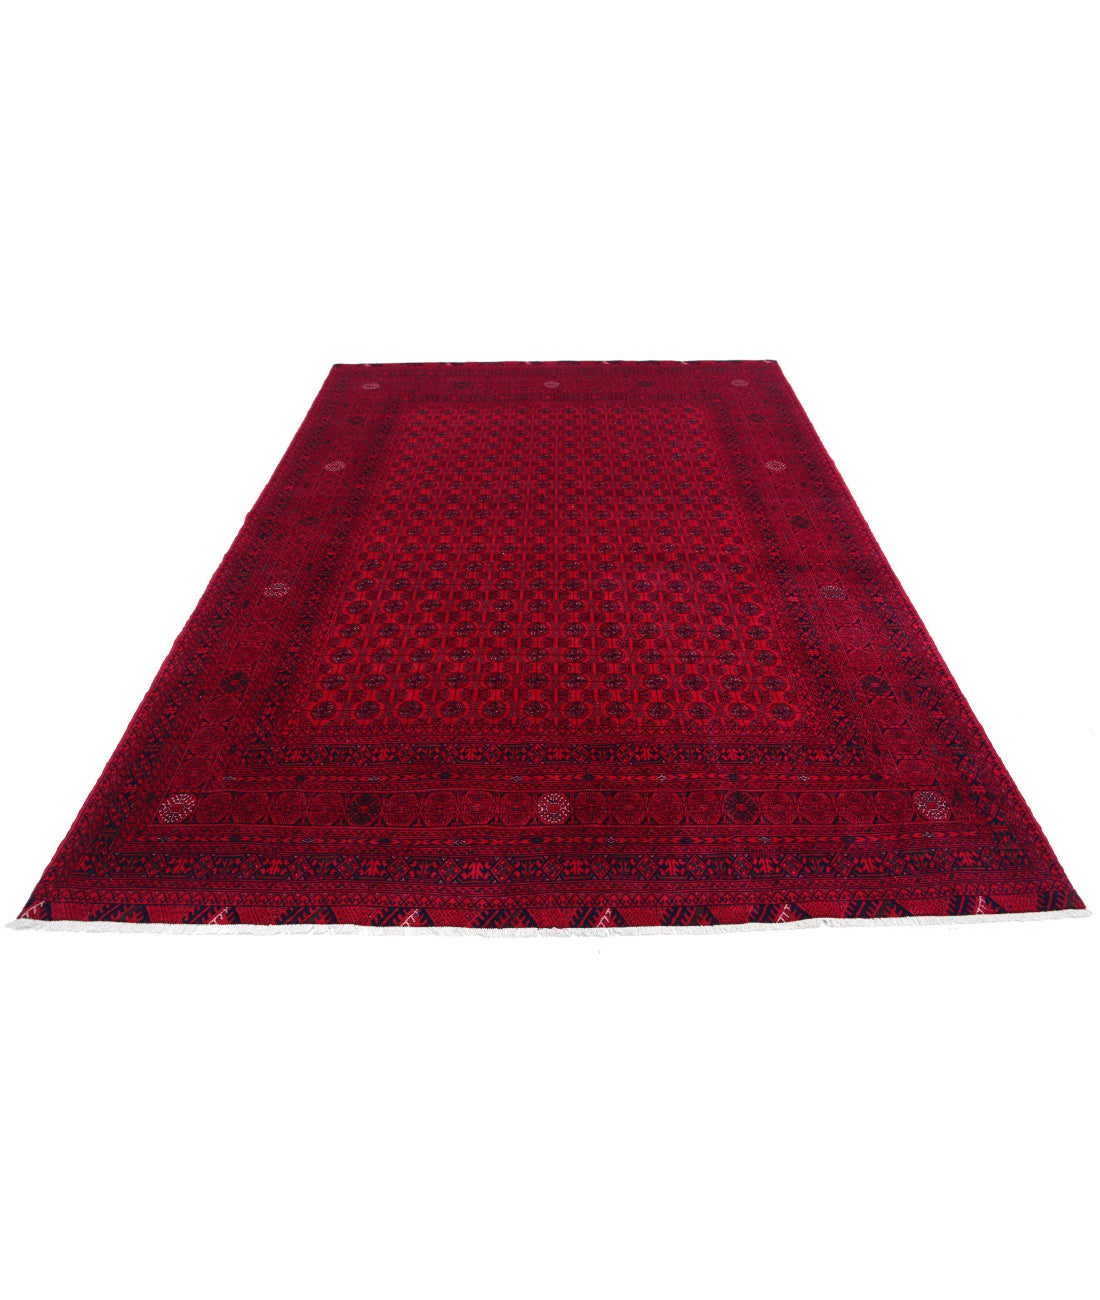 Hand Knotted Afghan Beljik Wool Rug - 6'4'' x 9'3'' 6'4'' x 9'3'' (190 X 278) / Red / Red